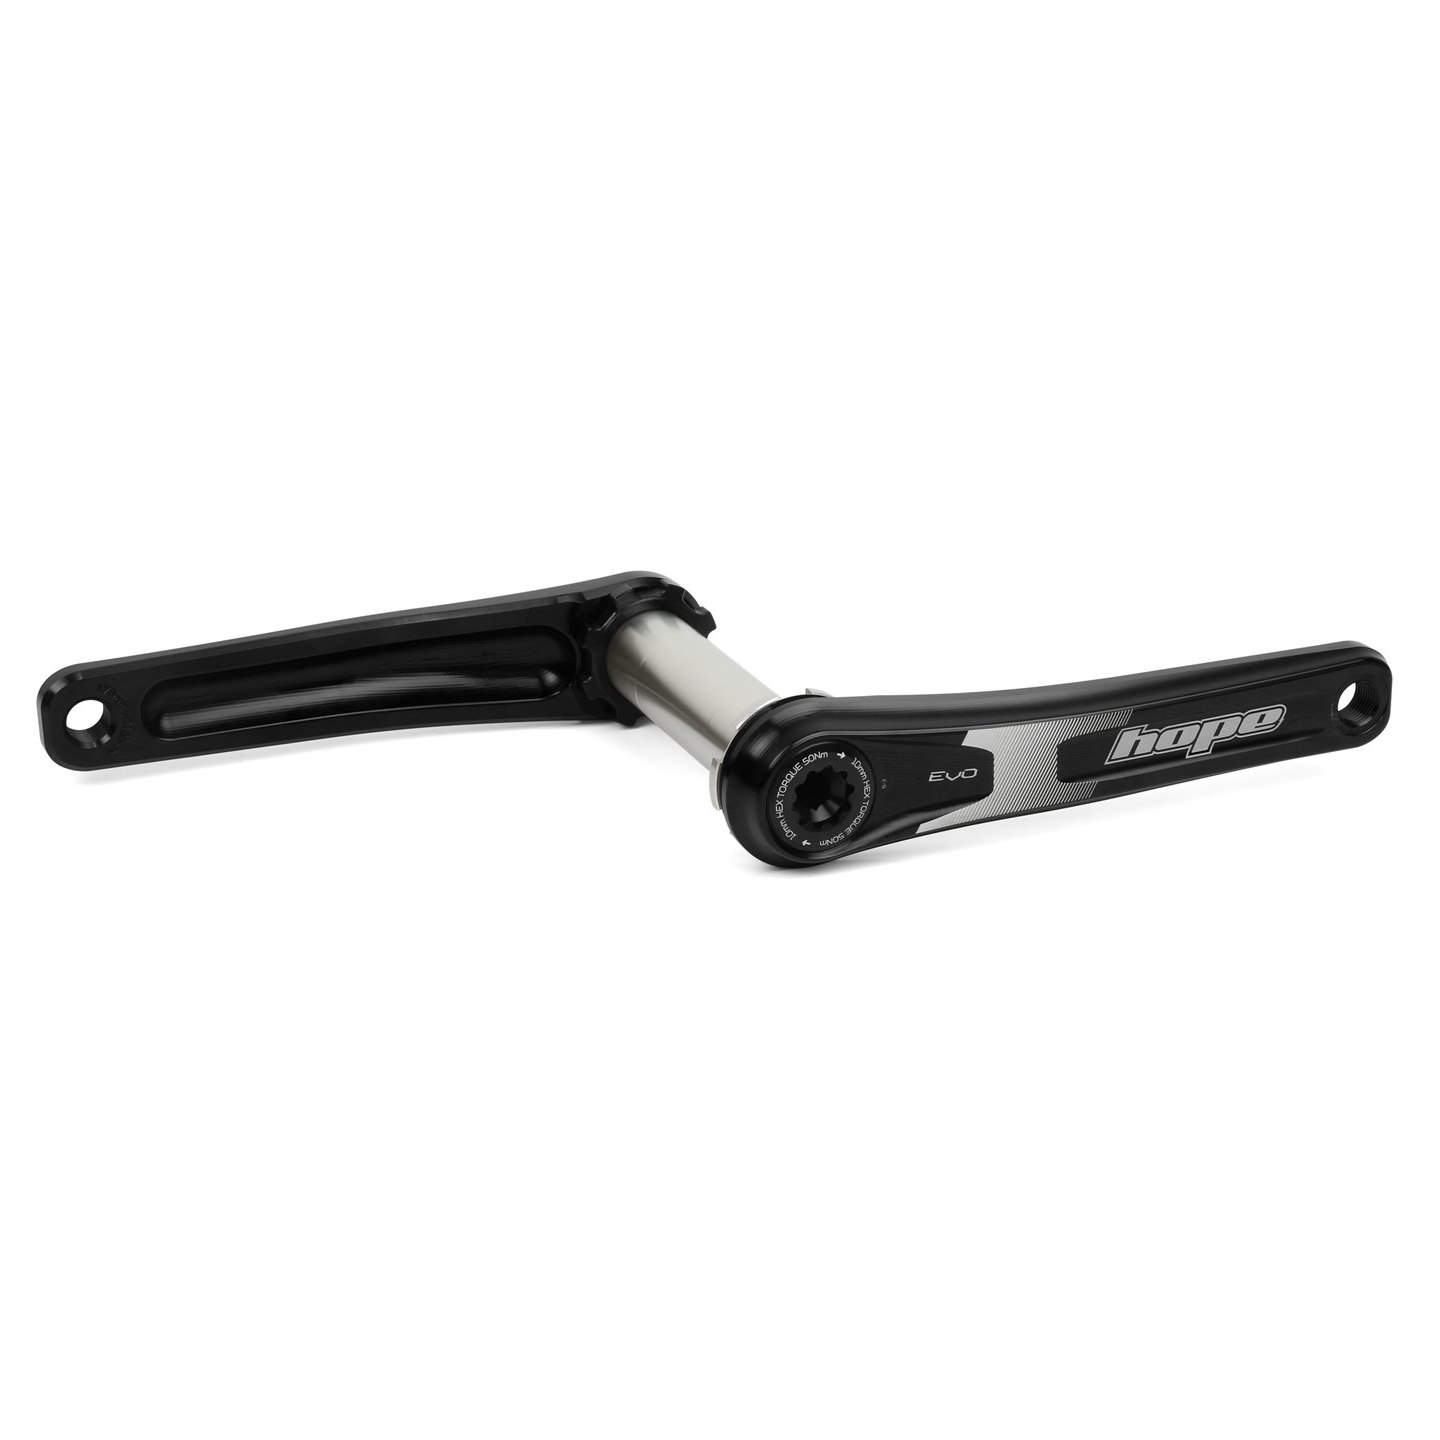 Productfoto van Hope EVO Crank without Spider - DH - 83mm - black